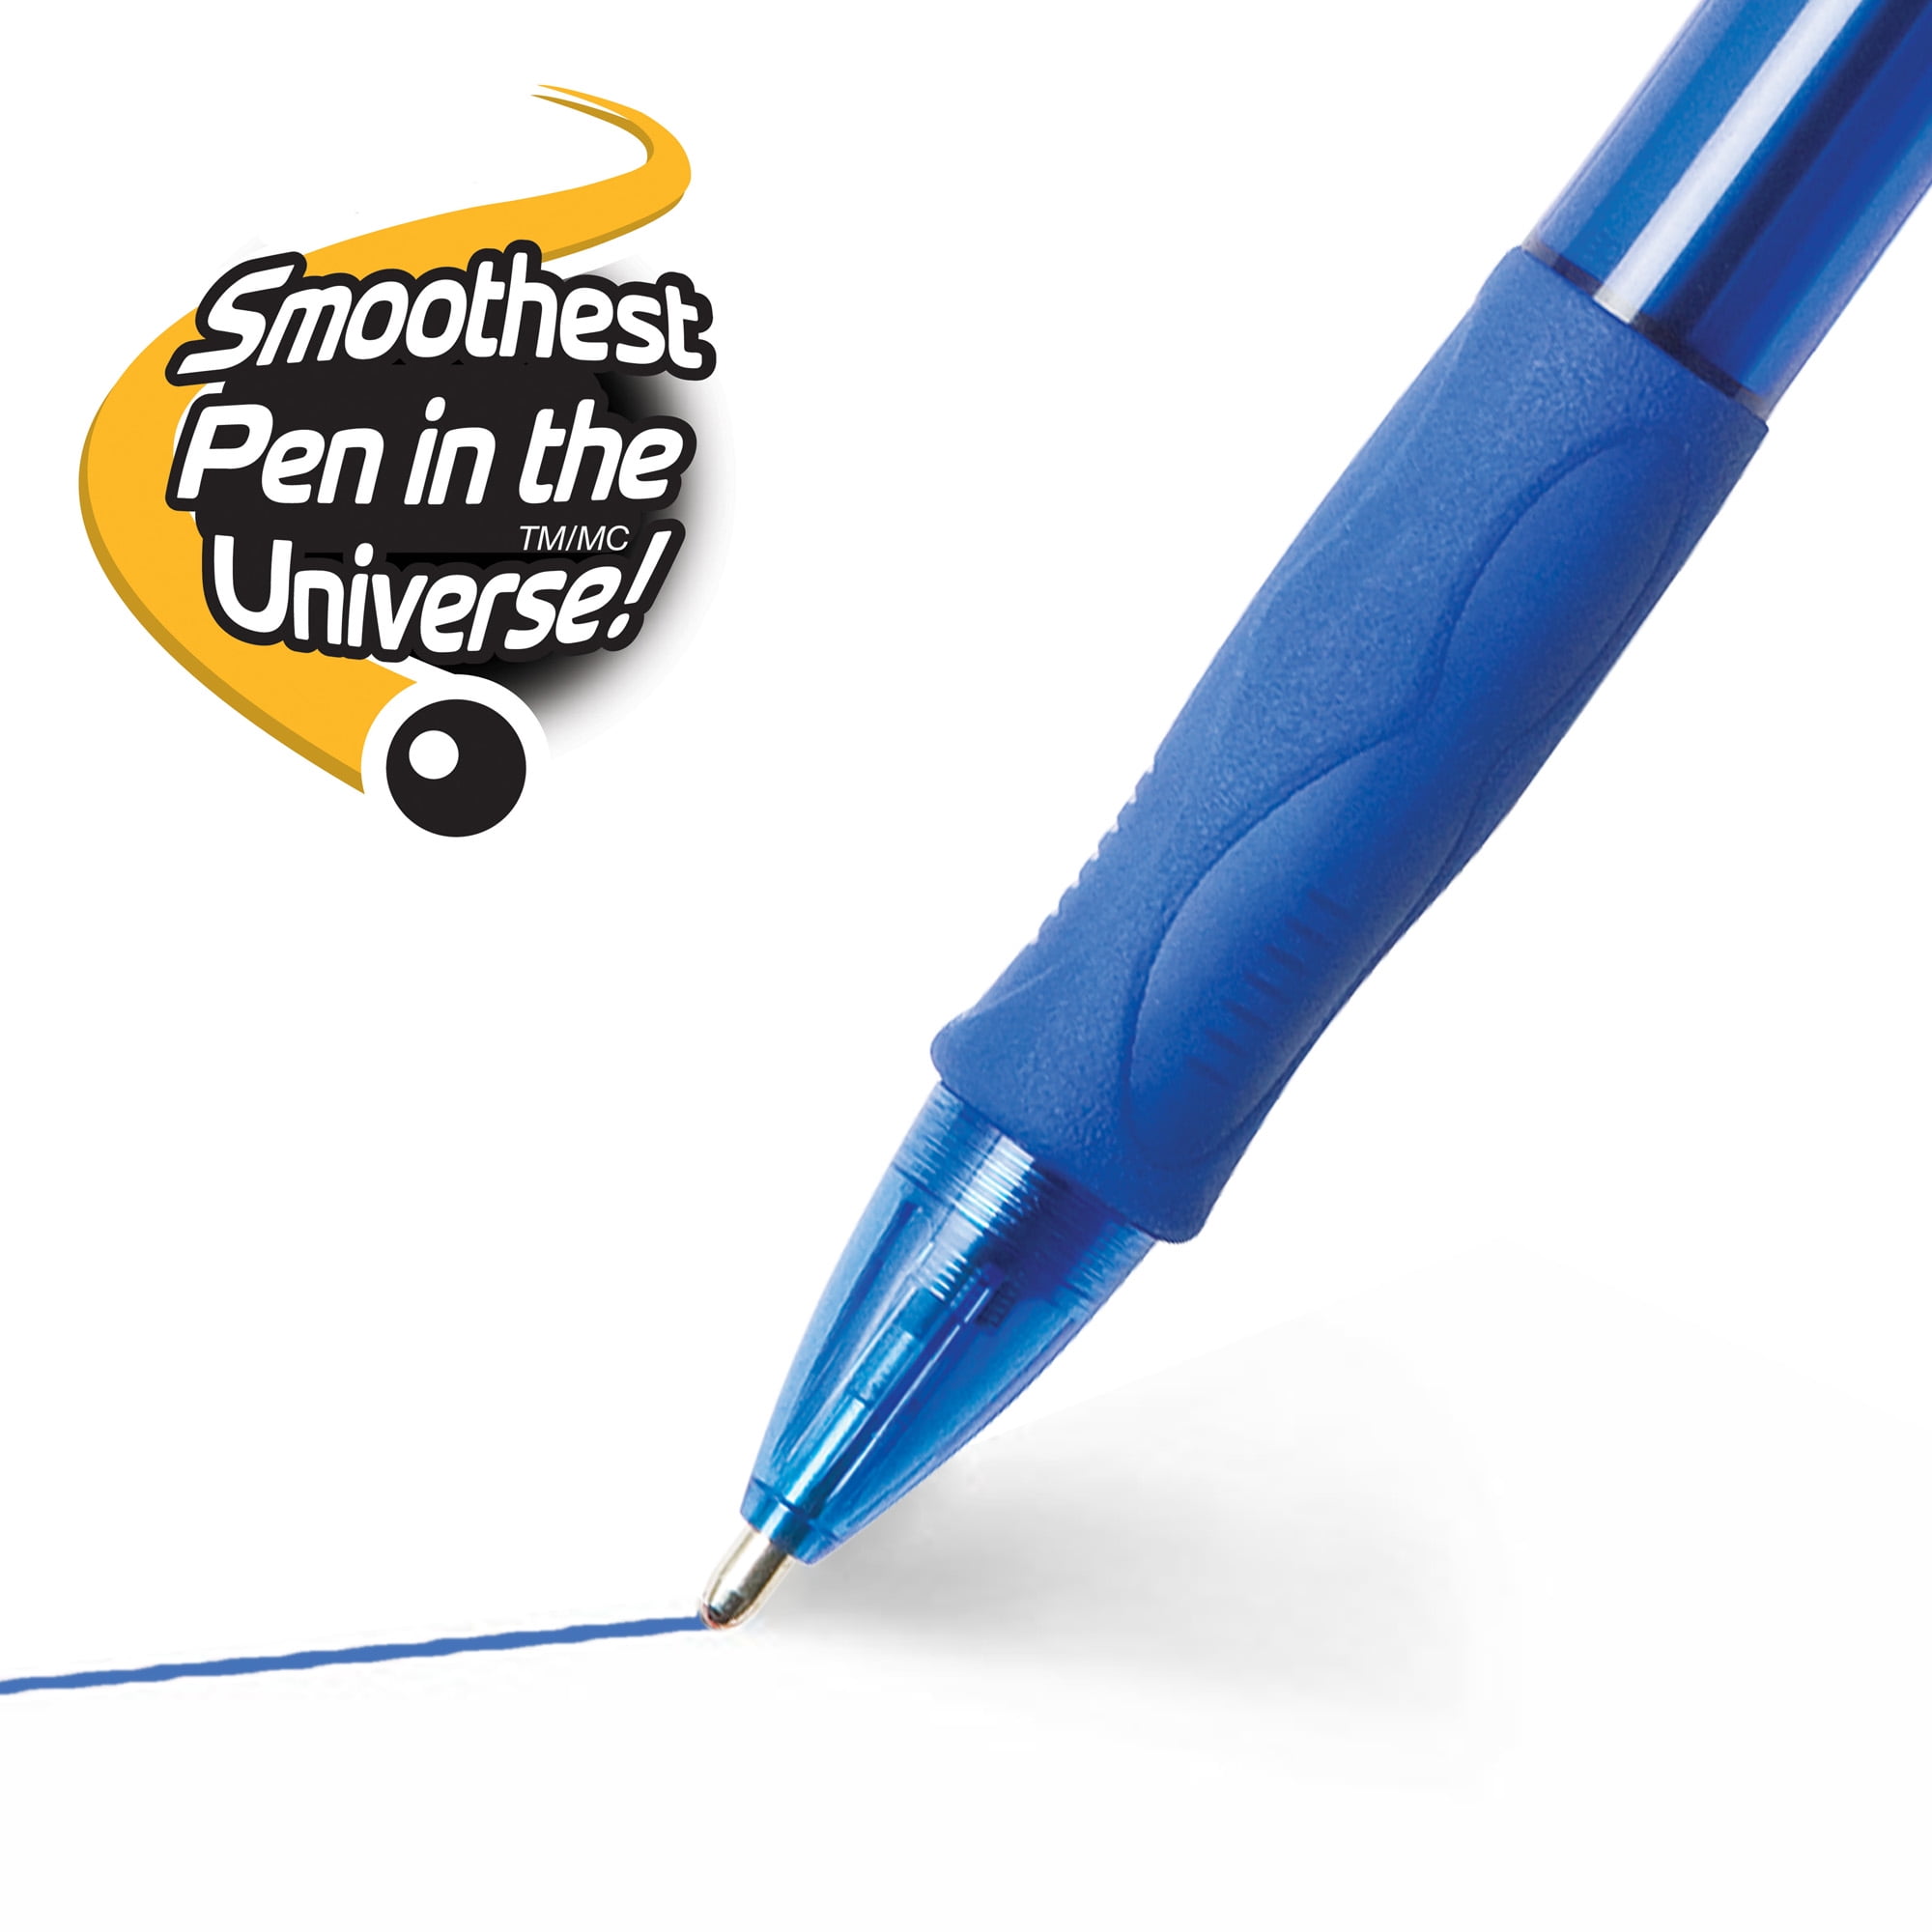 BIC Velocity Bold Fashion Retractable Ball Pen, Bold Point (1.6 mm),  Assorted, 4-Count : Buy Online at Best Price in KSA - Souq is now  : Office Products